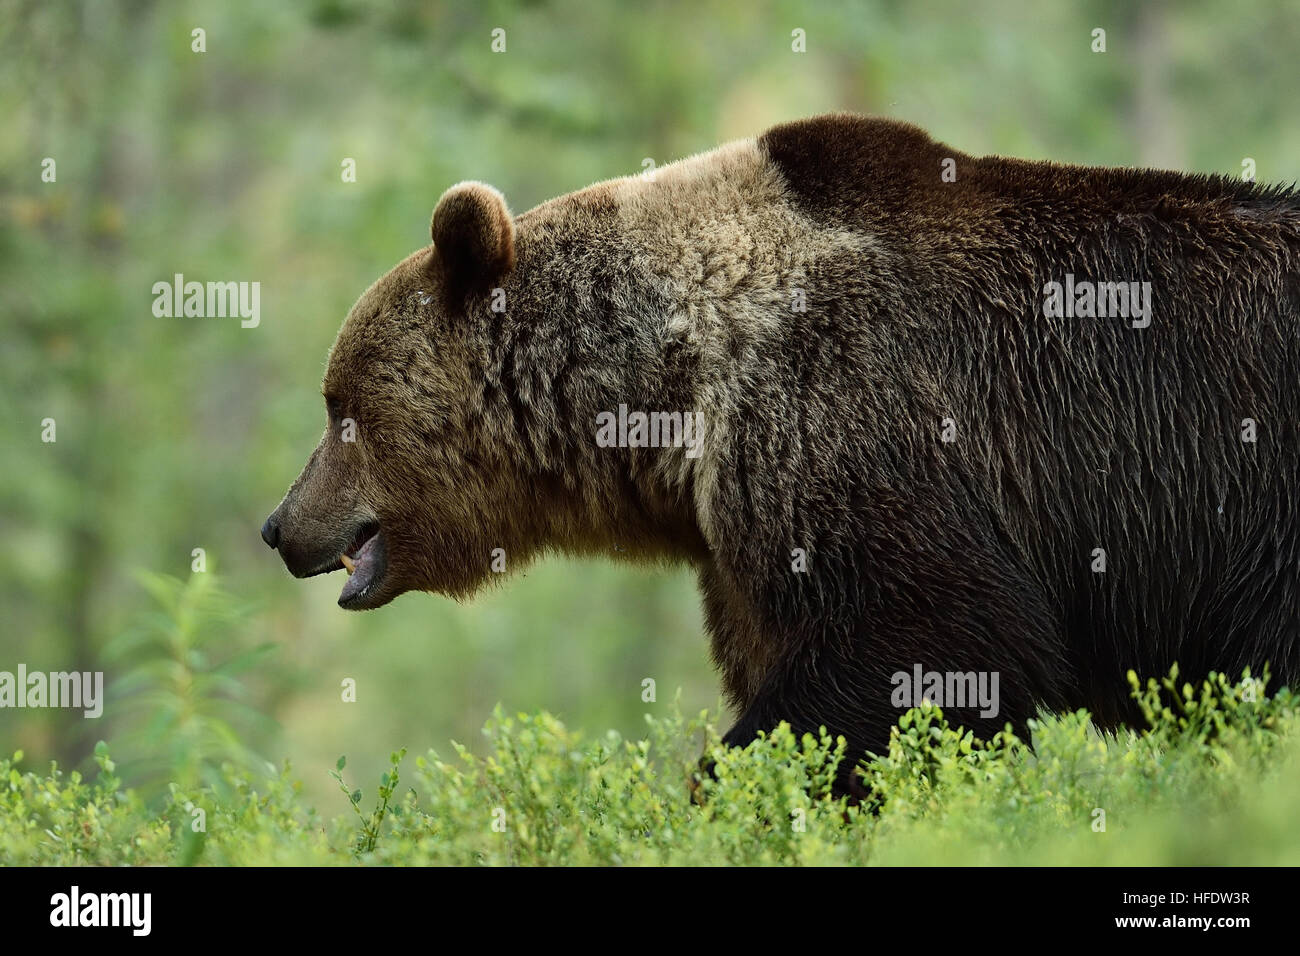 brown bear side view Stock Photo